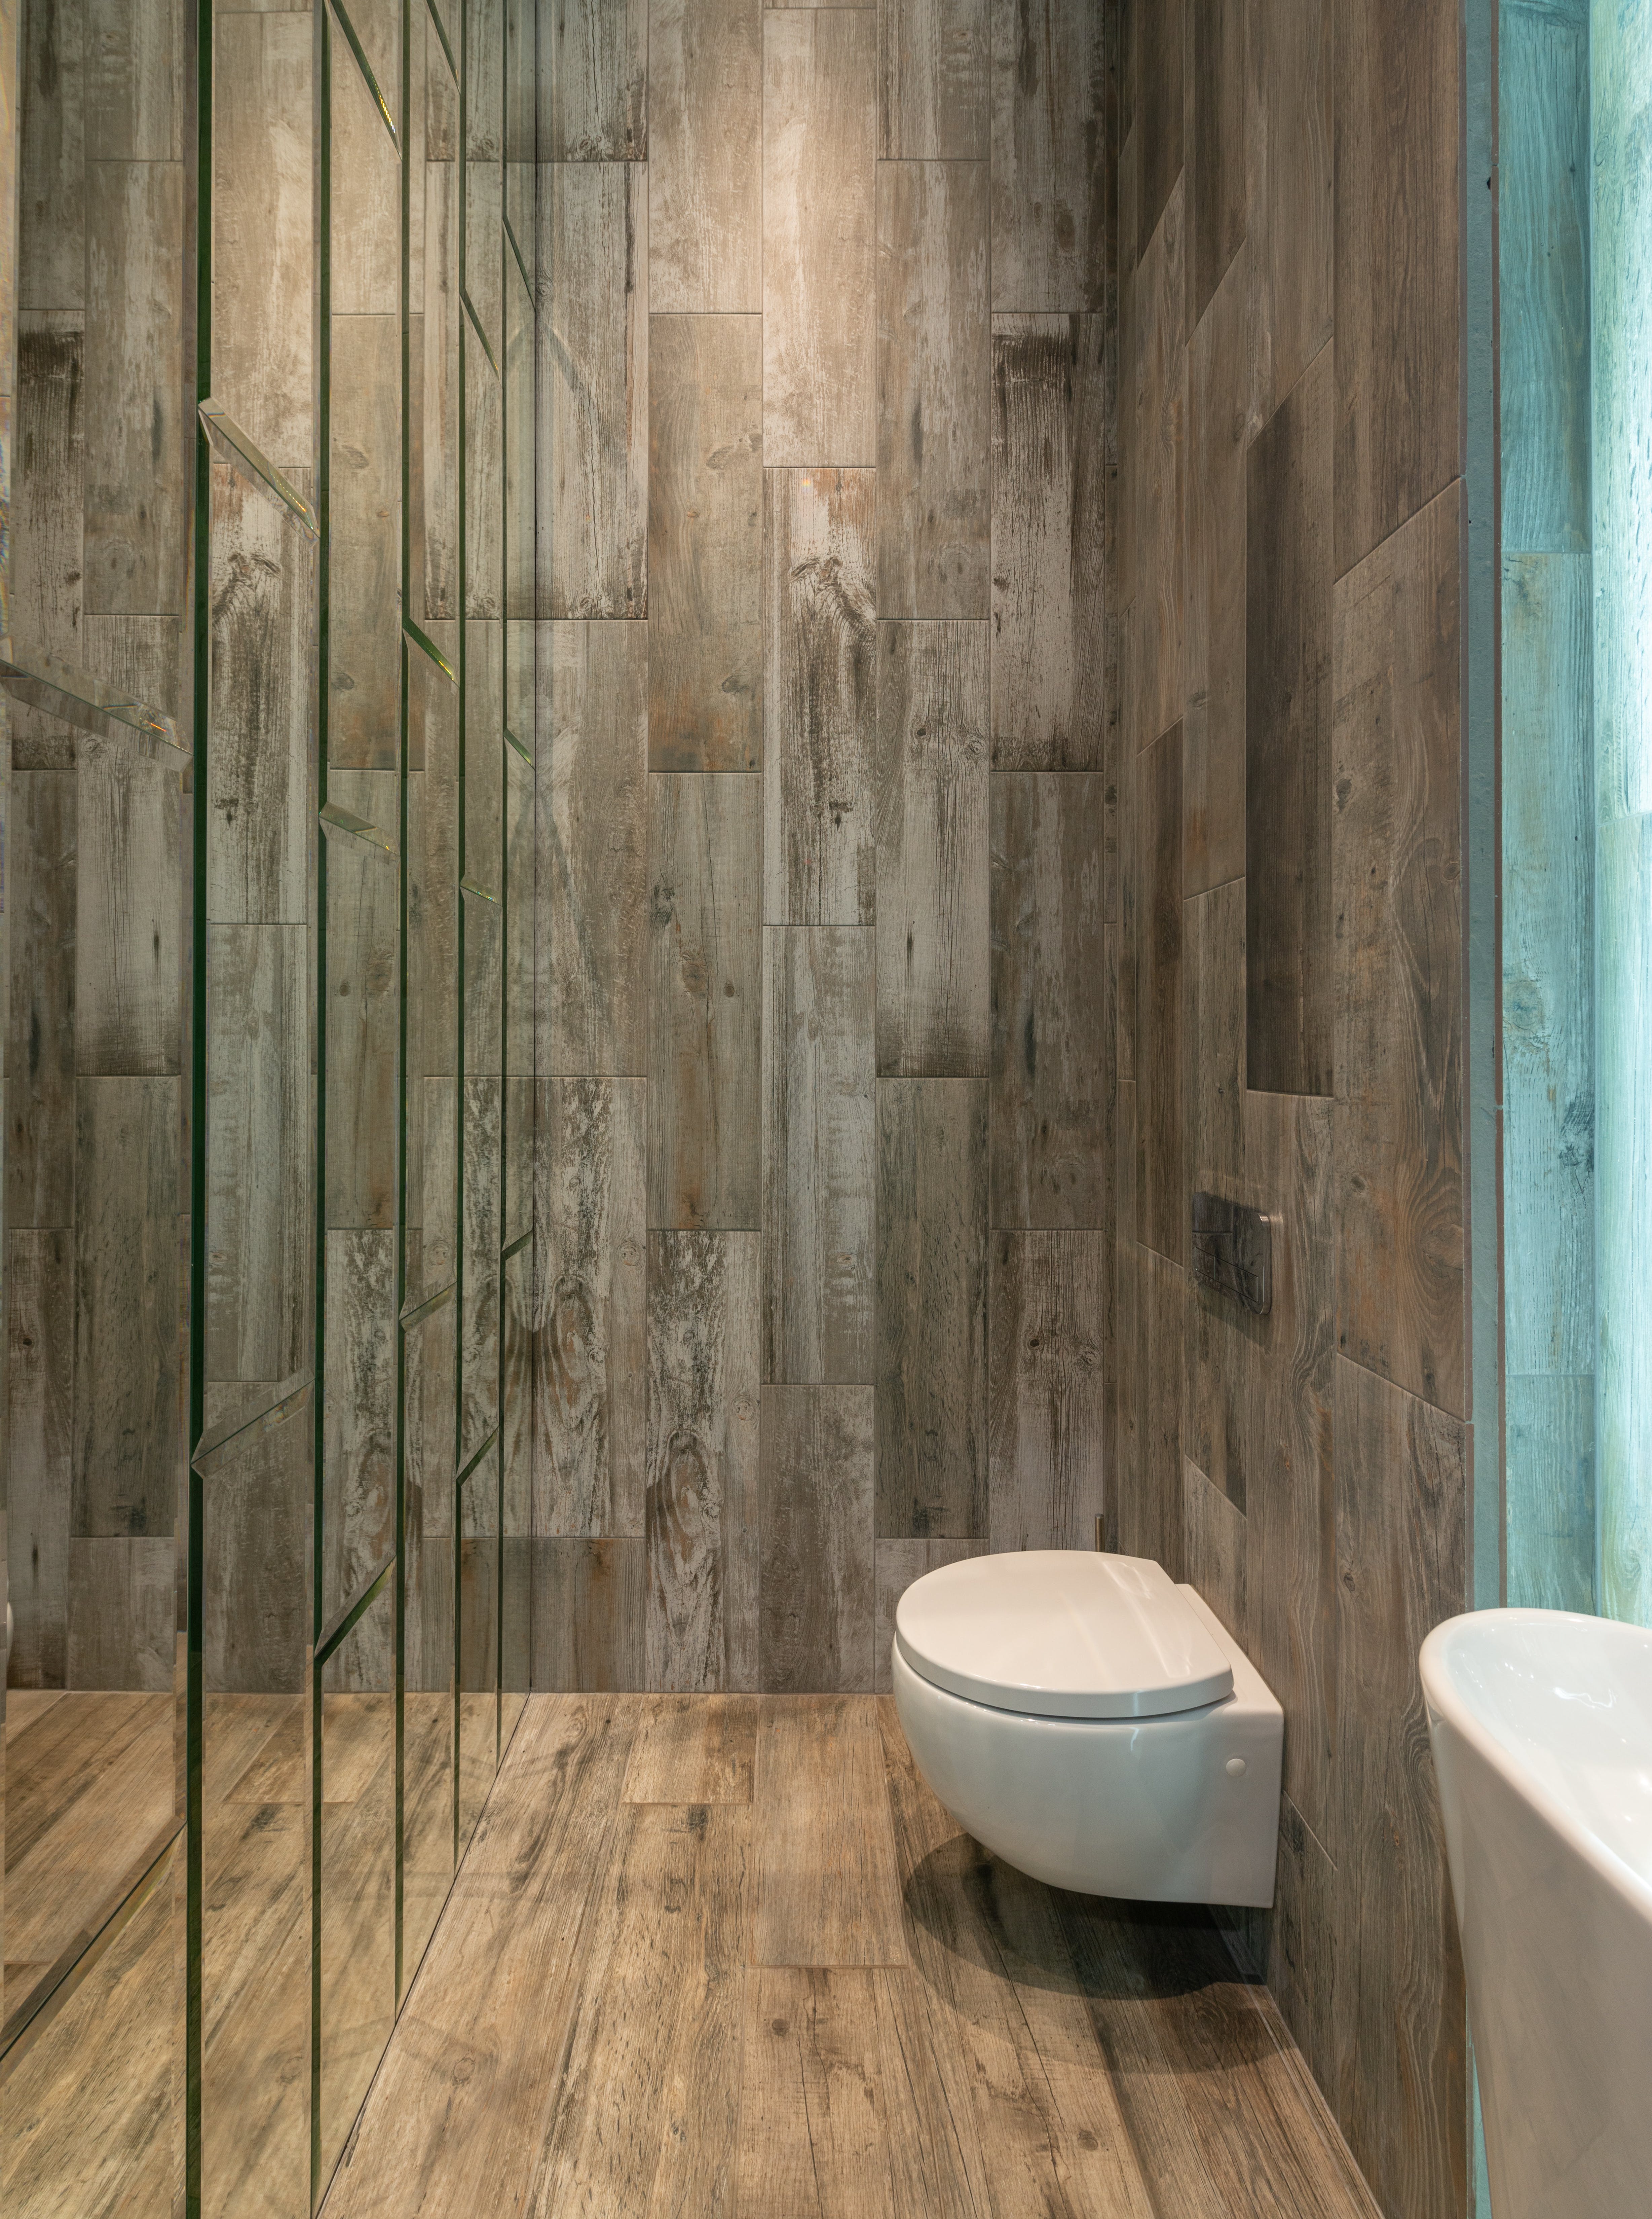 Modern bathroom with wooden panels on the walls. | Source: Pexels